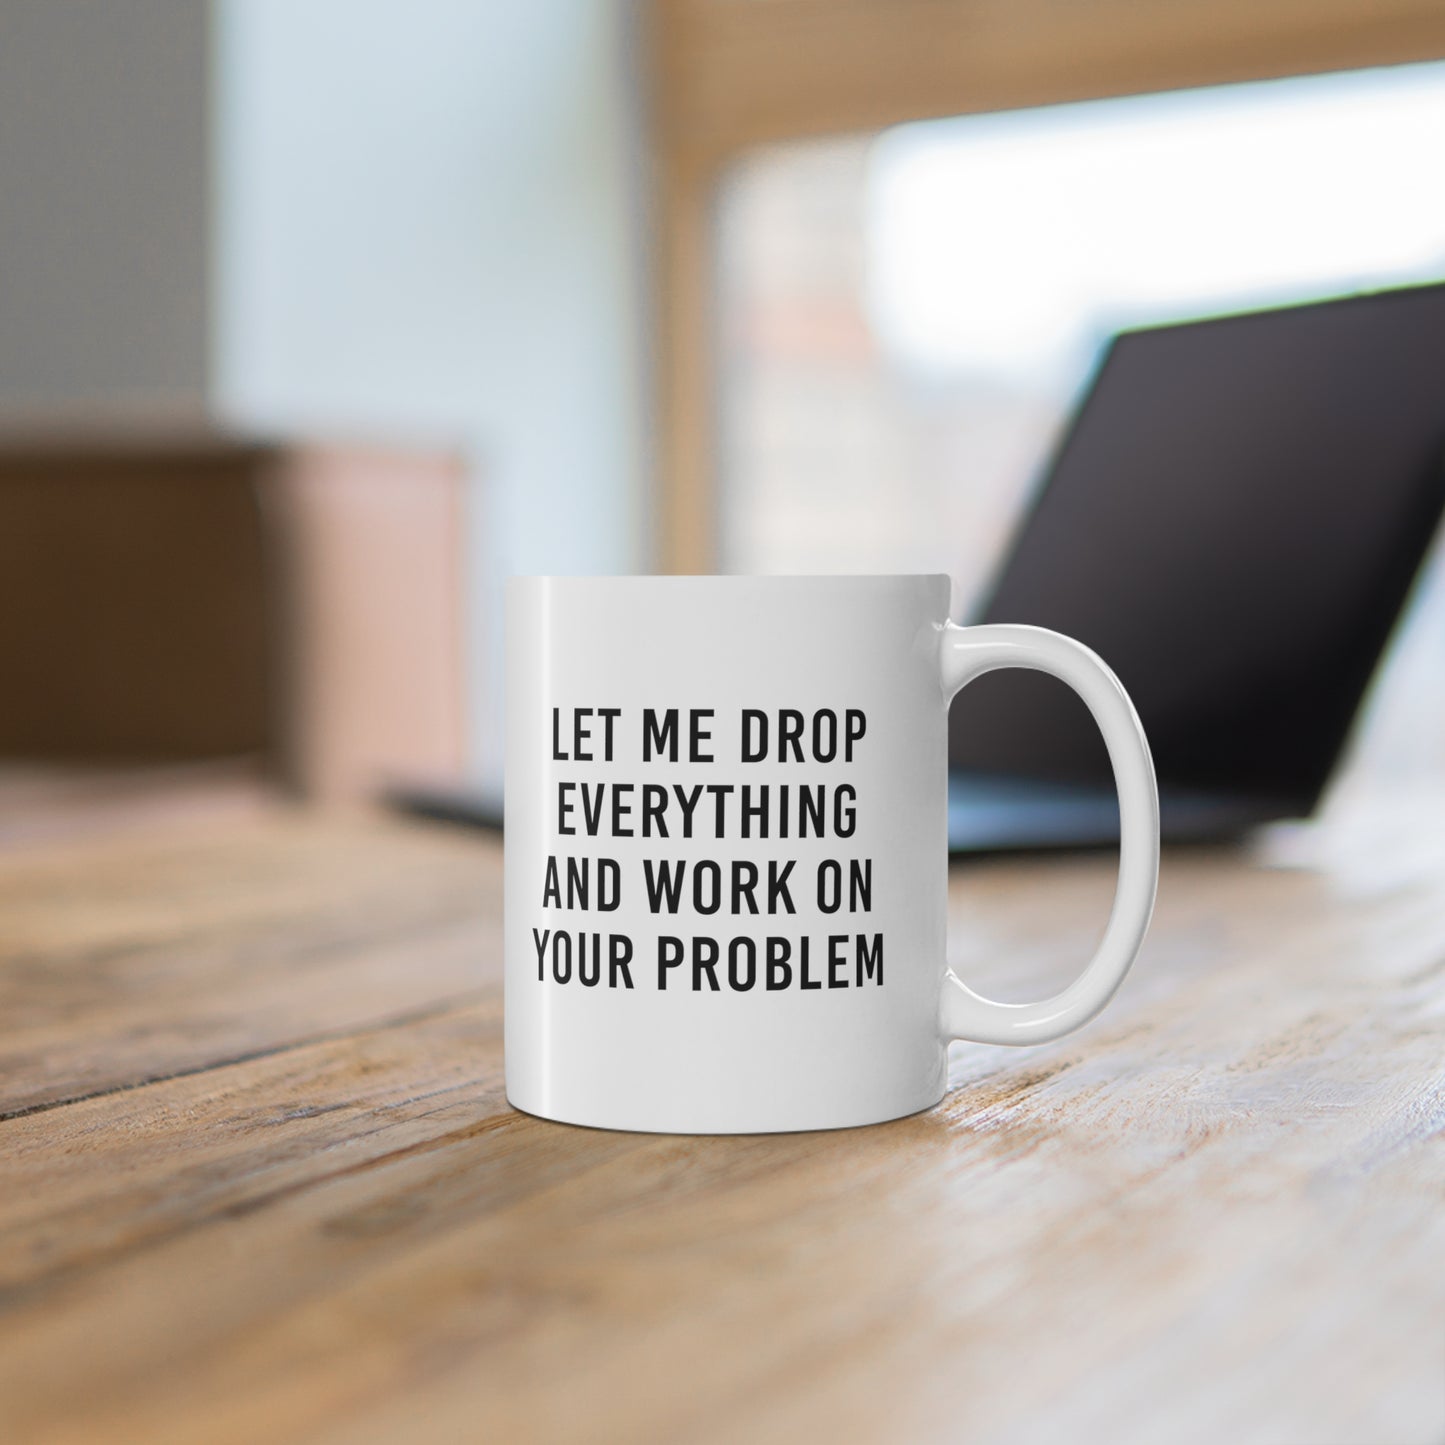 Let Me Drop Everything and Work on Your Problem Coffee Mug 11oz